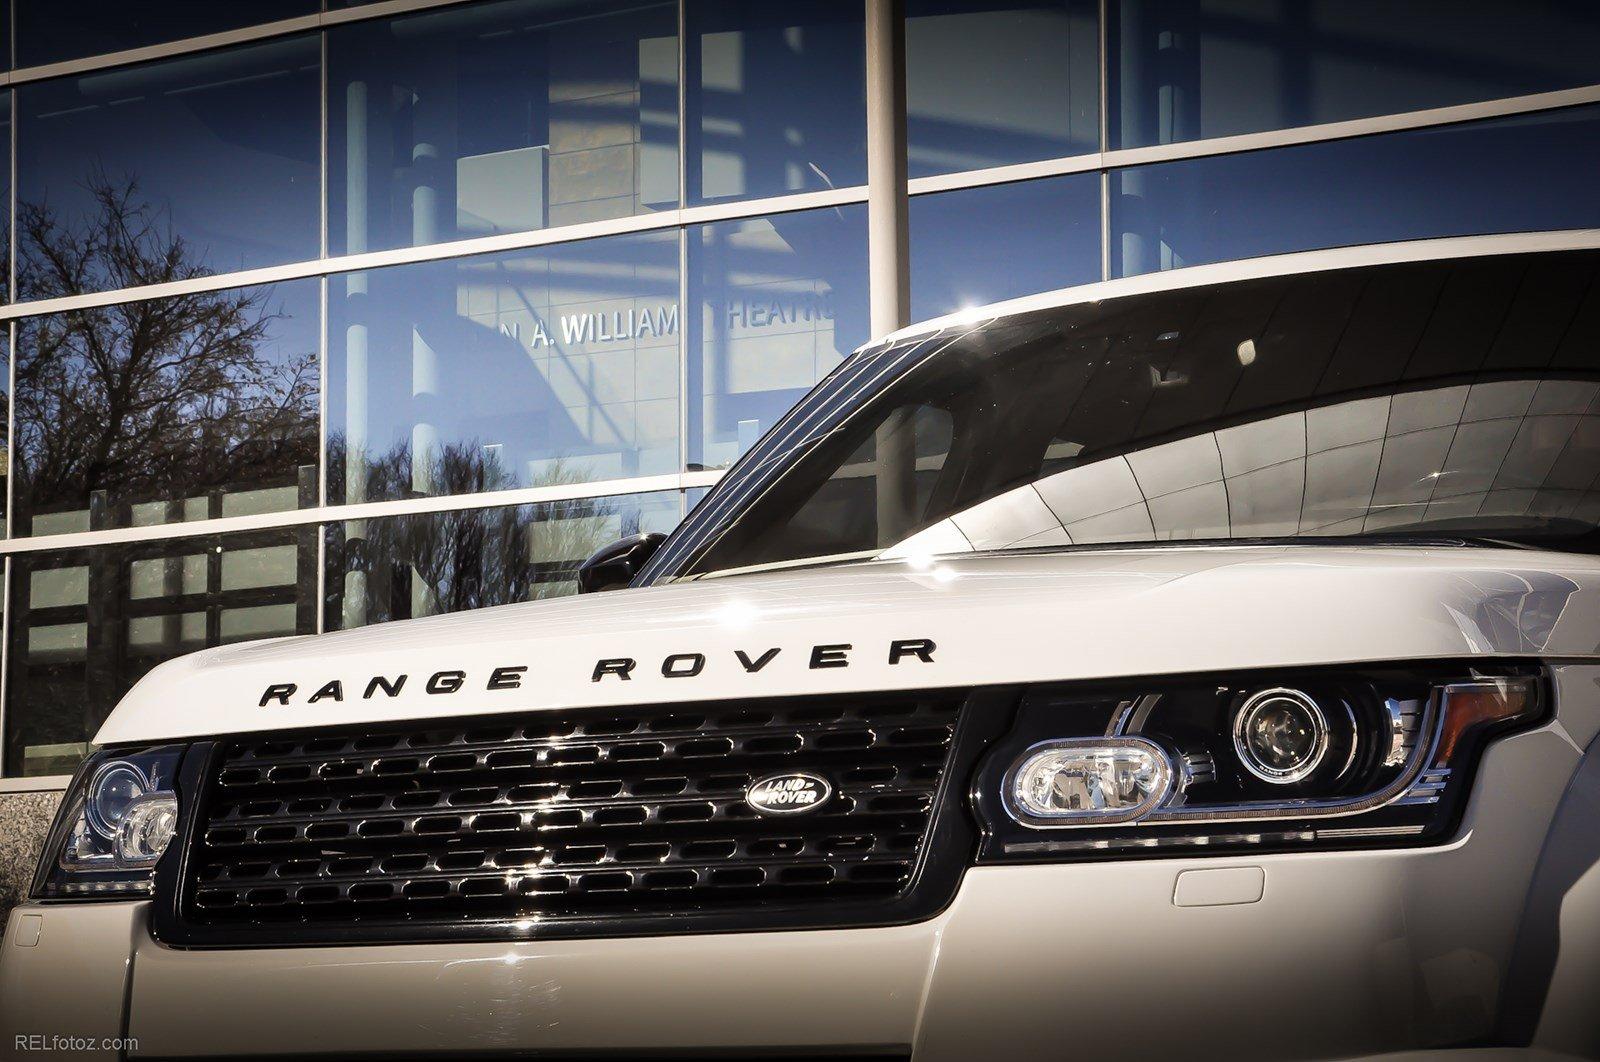 Used 2014 Land Rover Range Rover Supercharged Autobiography for sale Sold at Gravity Autos Marietta in Marietta GA 30060 4